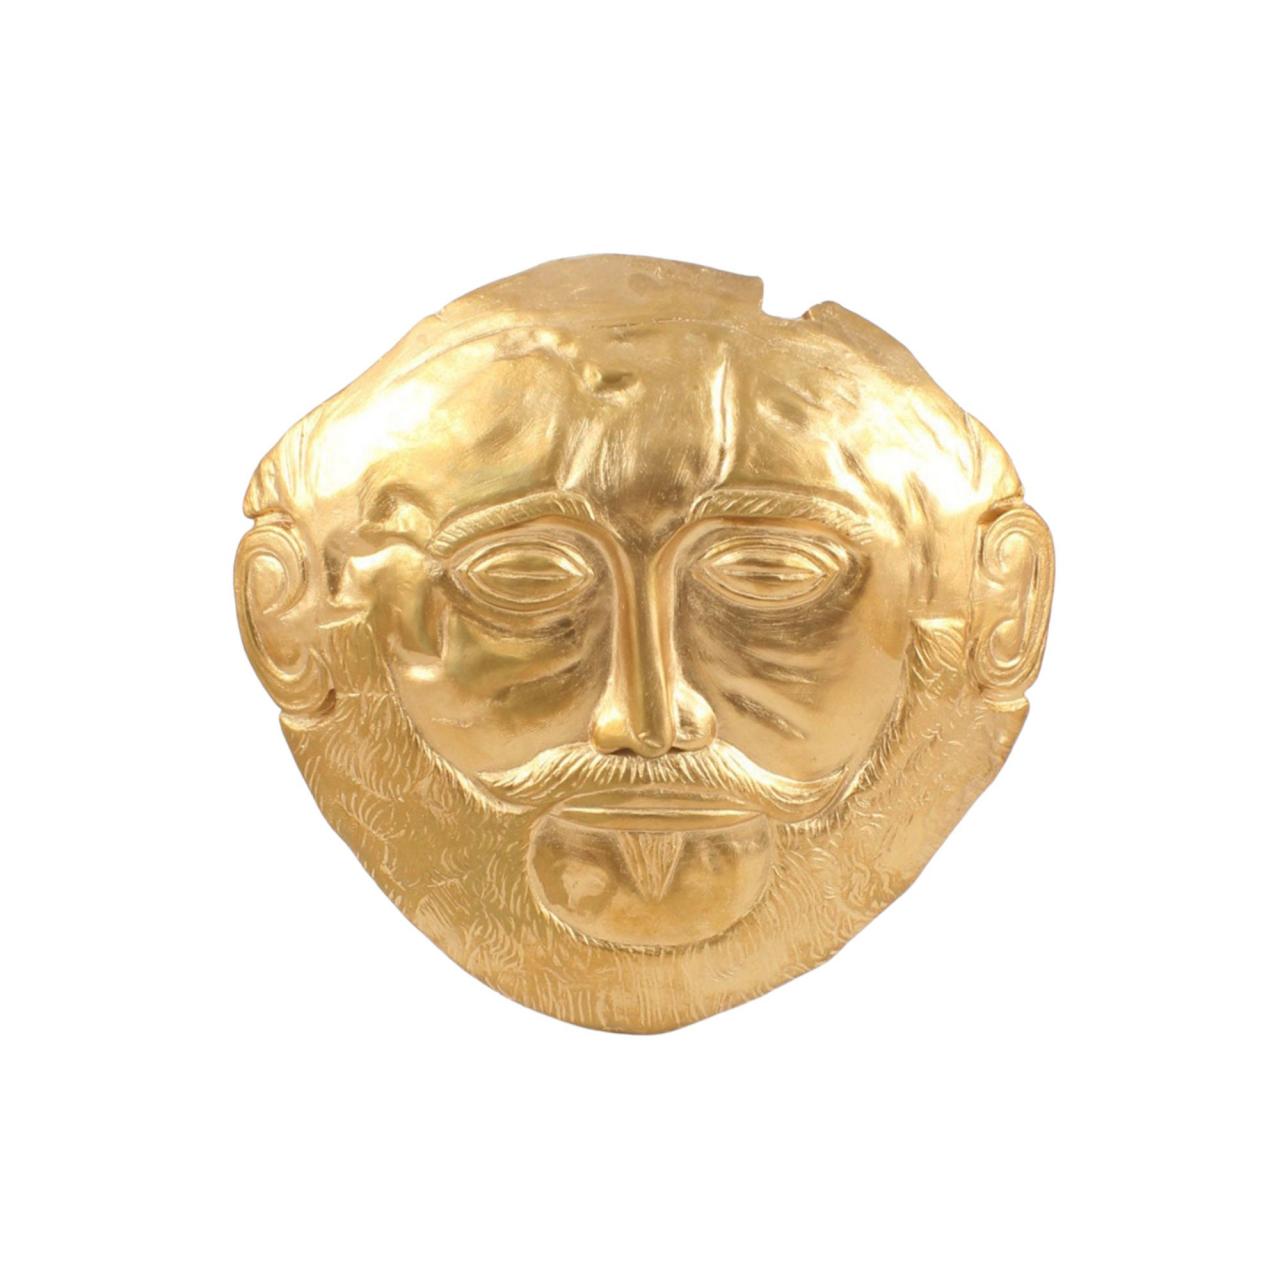 Agamemnon King Bas Relief Wall Mask Plaster Sculpture